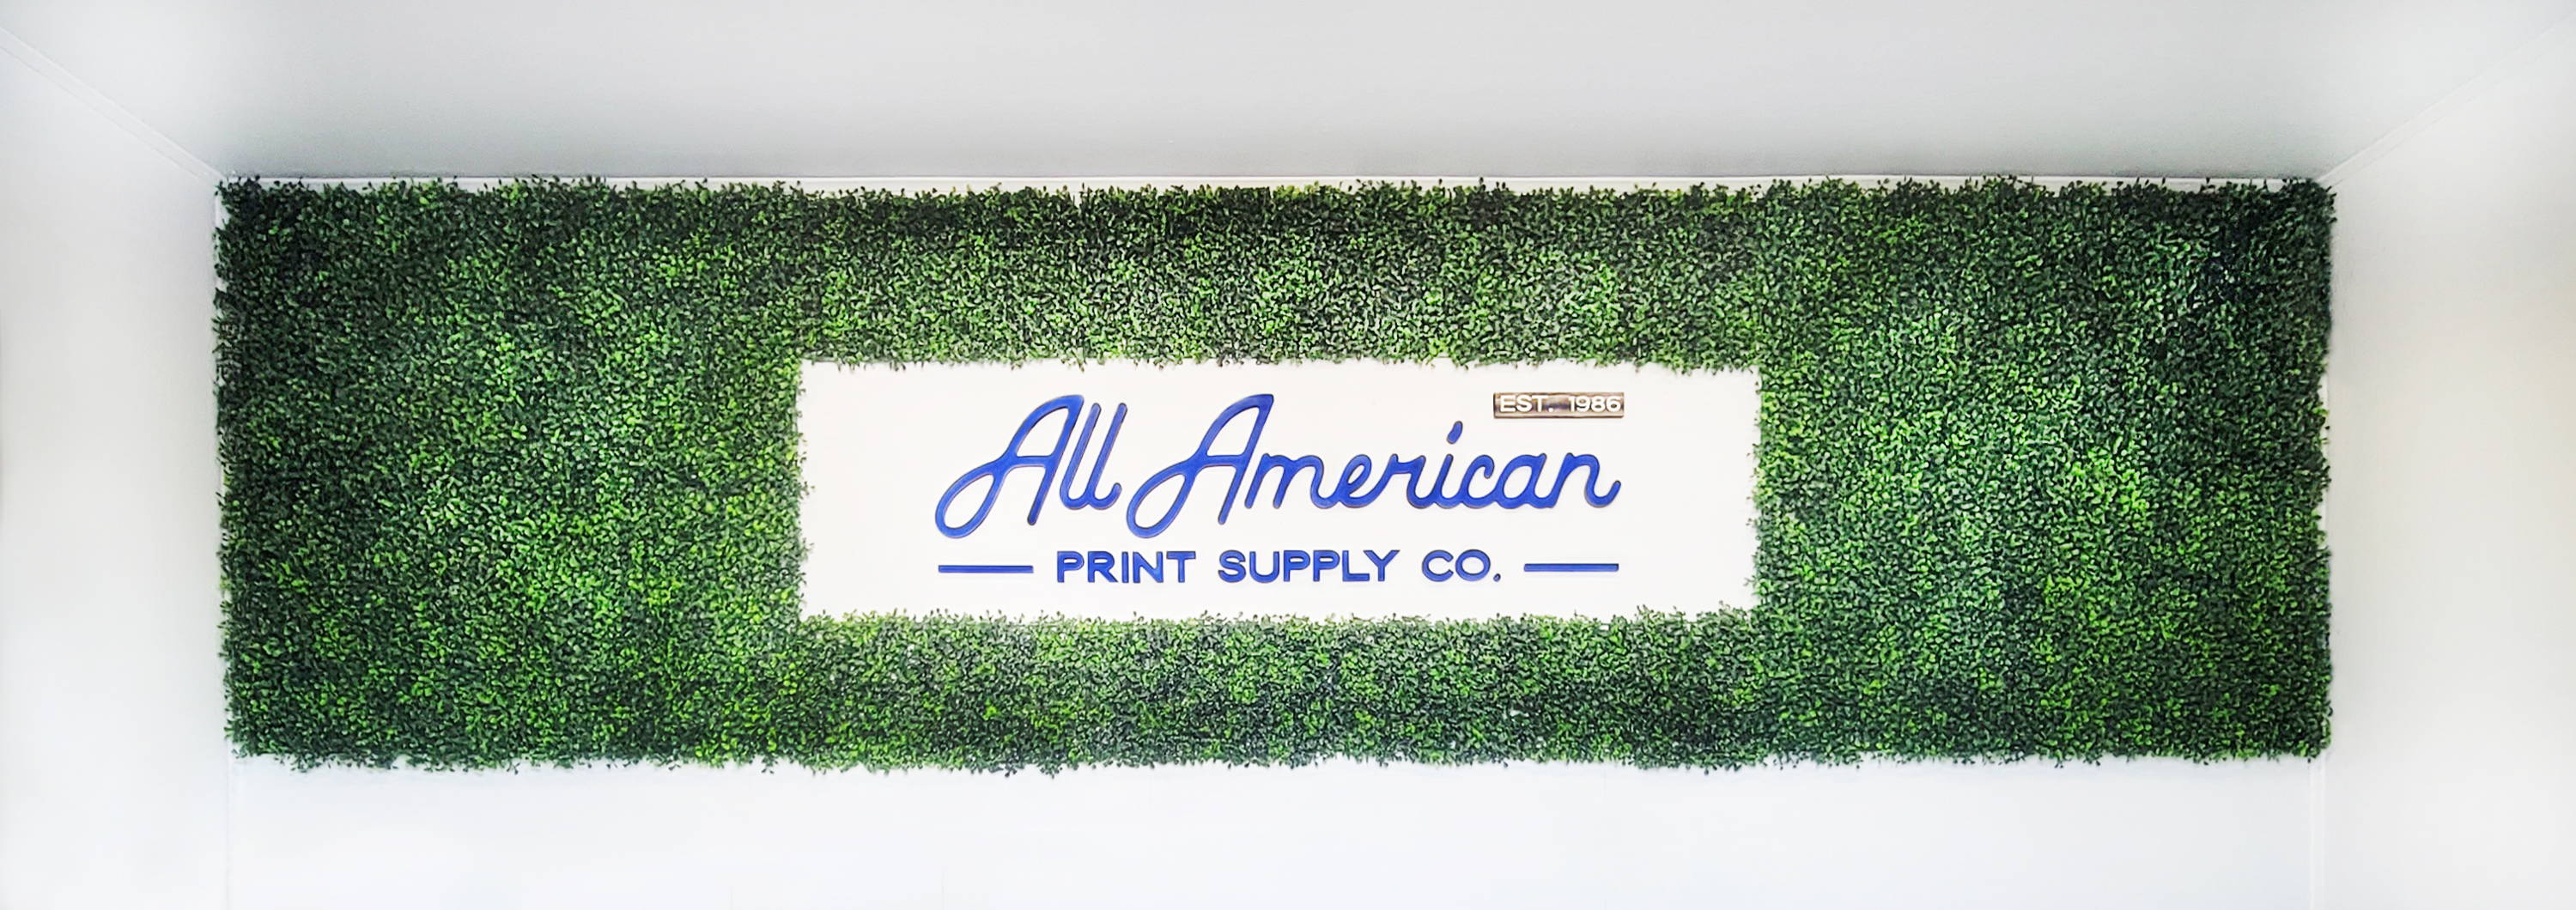 all american print supply  co